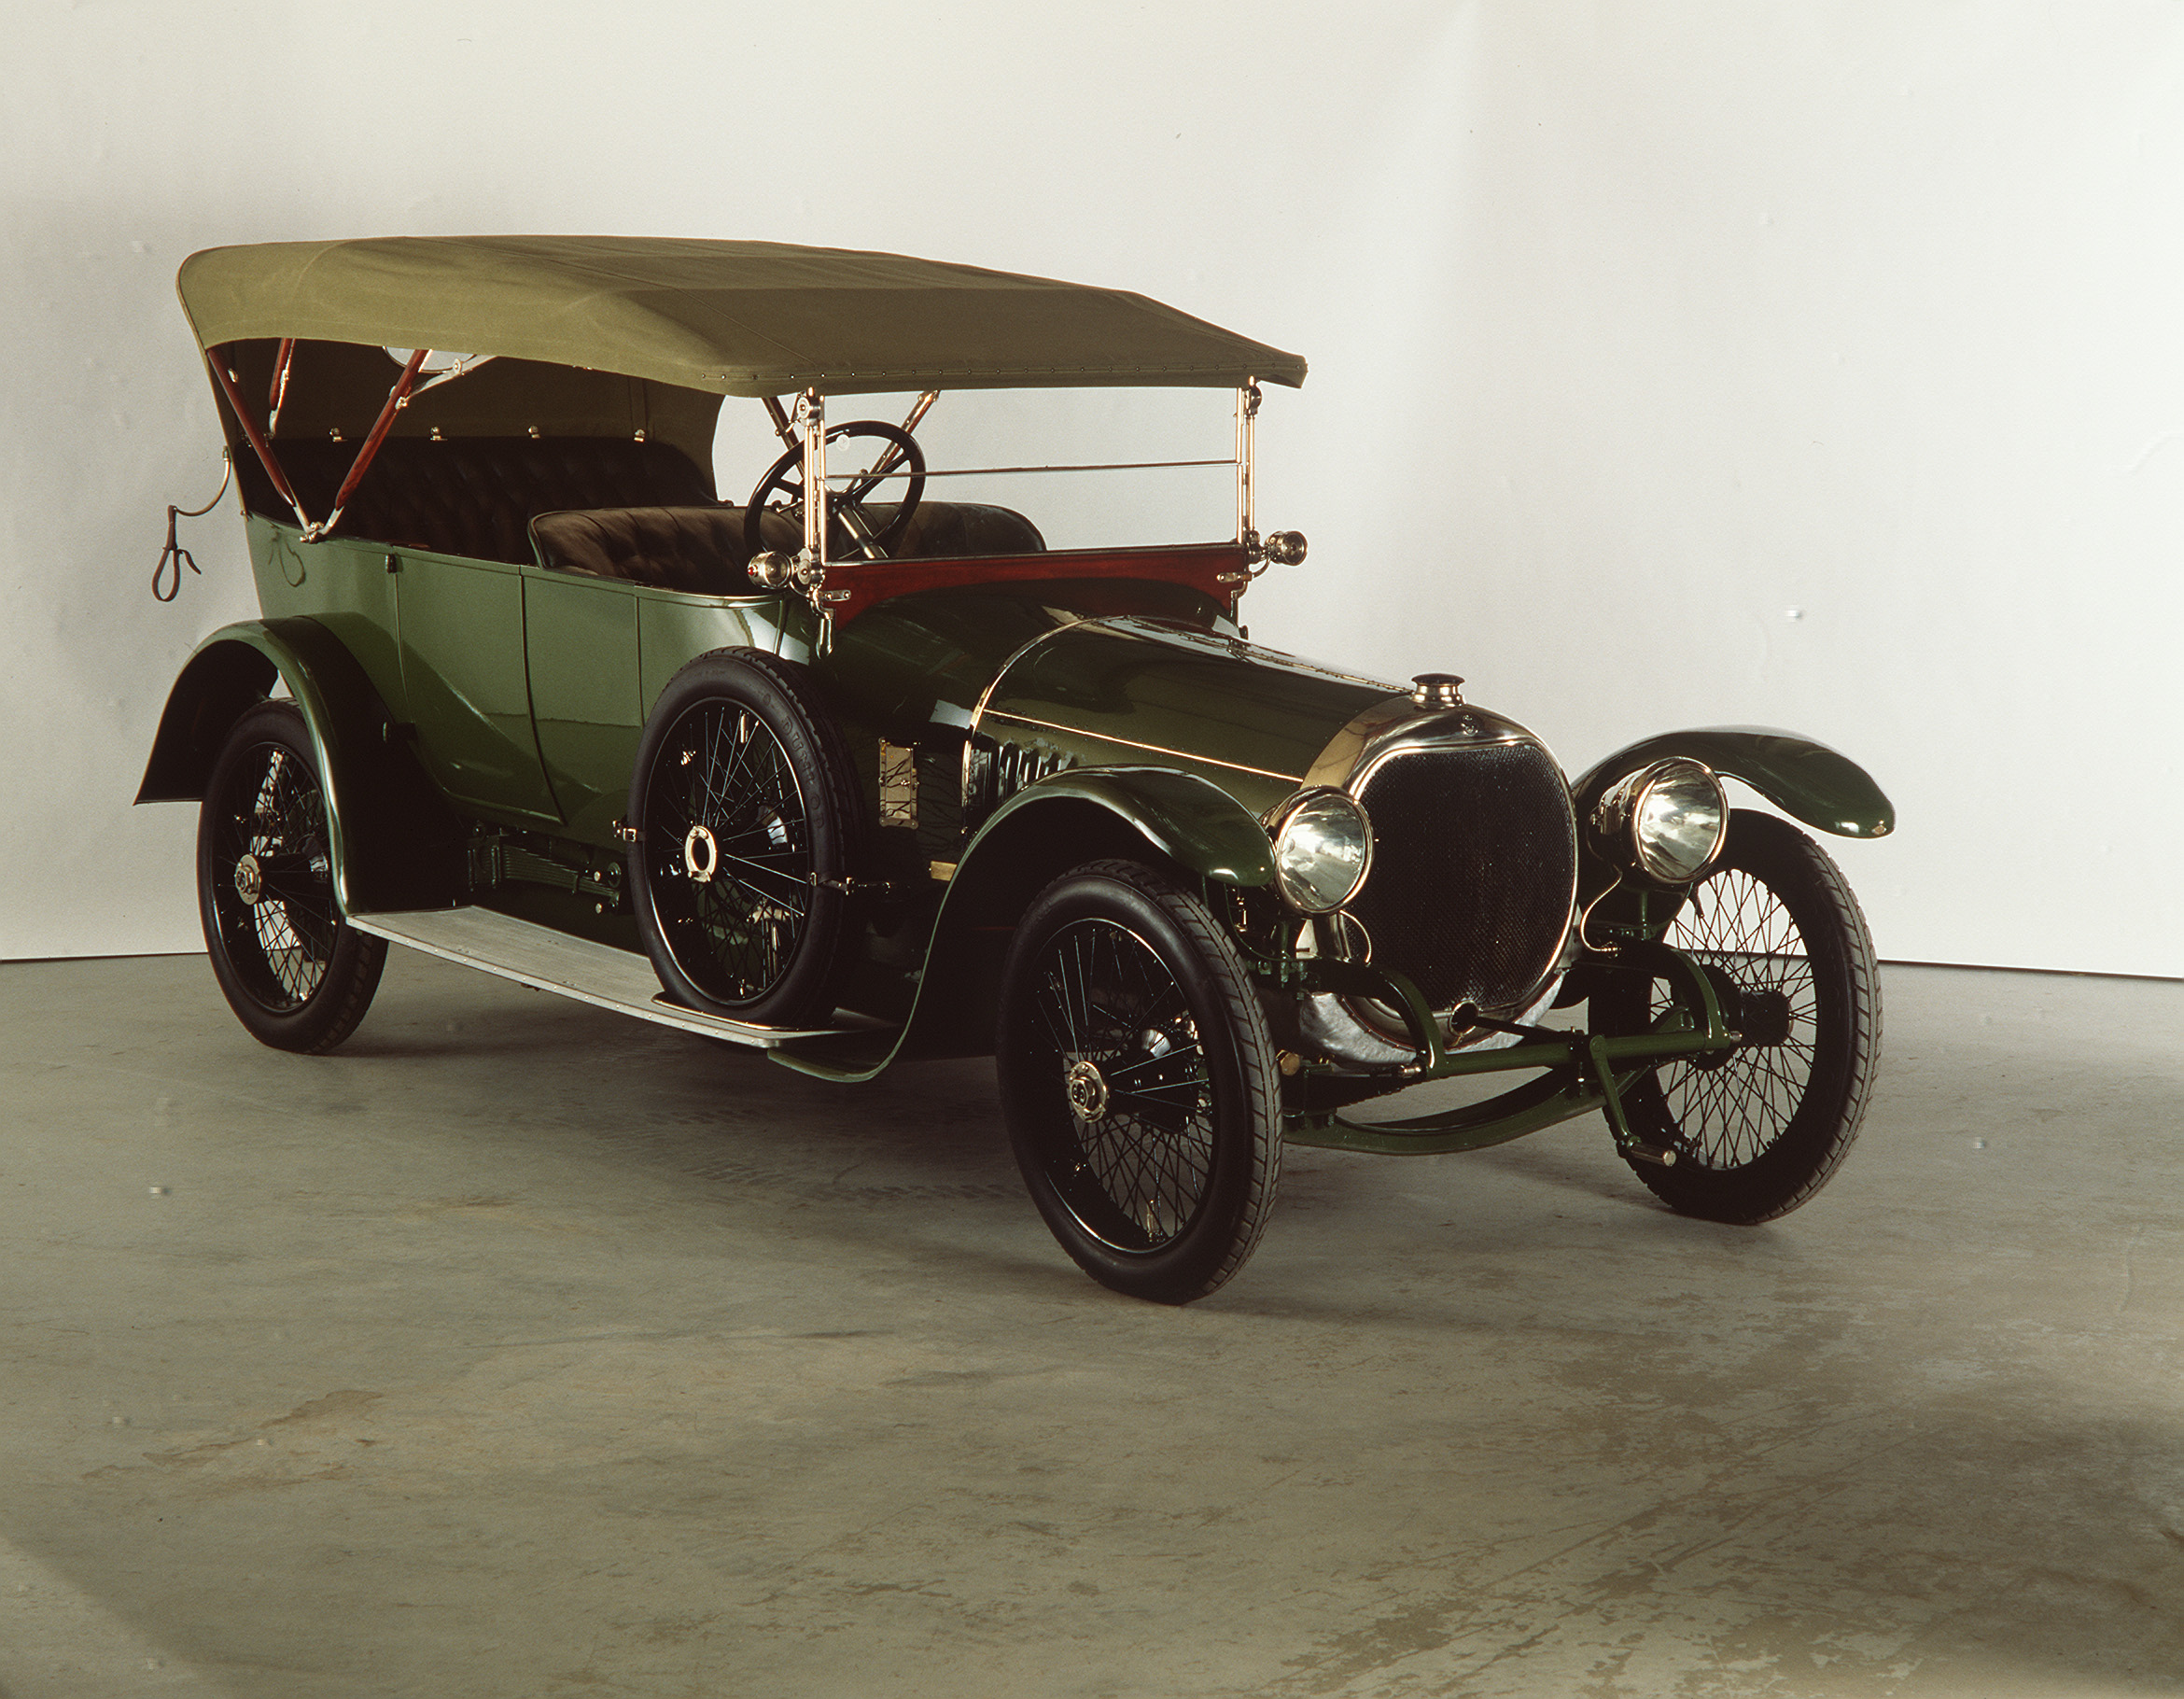 A black and green 1910s-era car with an open-top carriage and convertible roof-covering. The wheels of the car are very narrow yet have a wide diameter giving the car a high-set seating carriage.